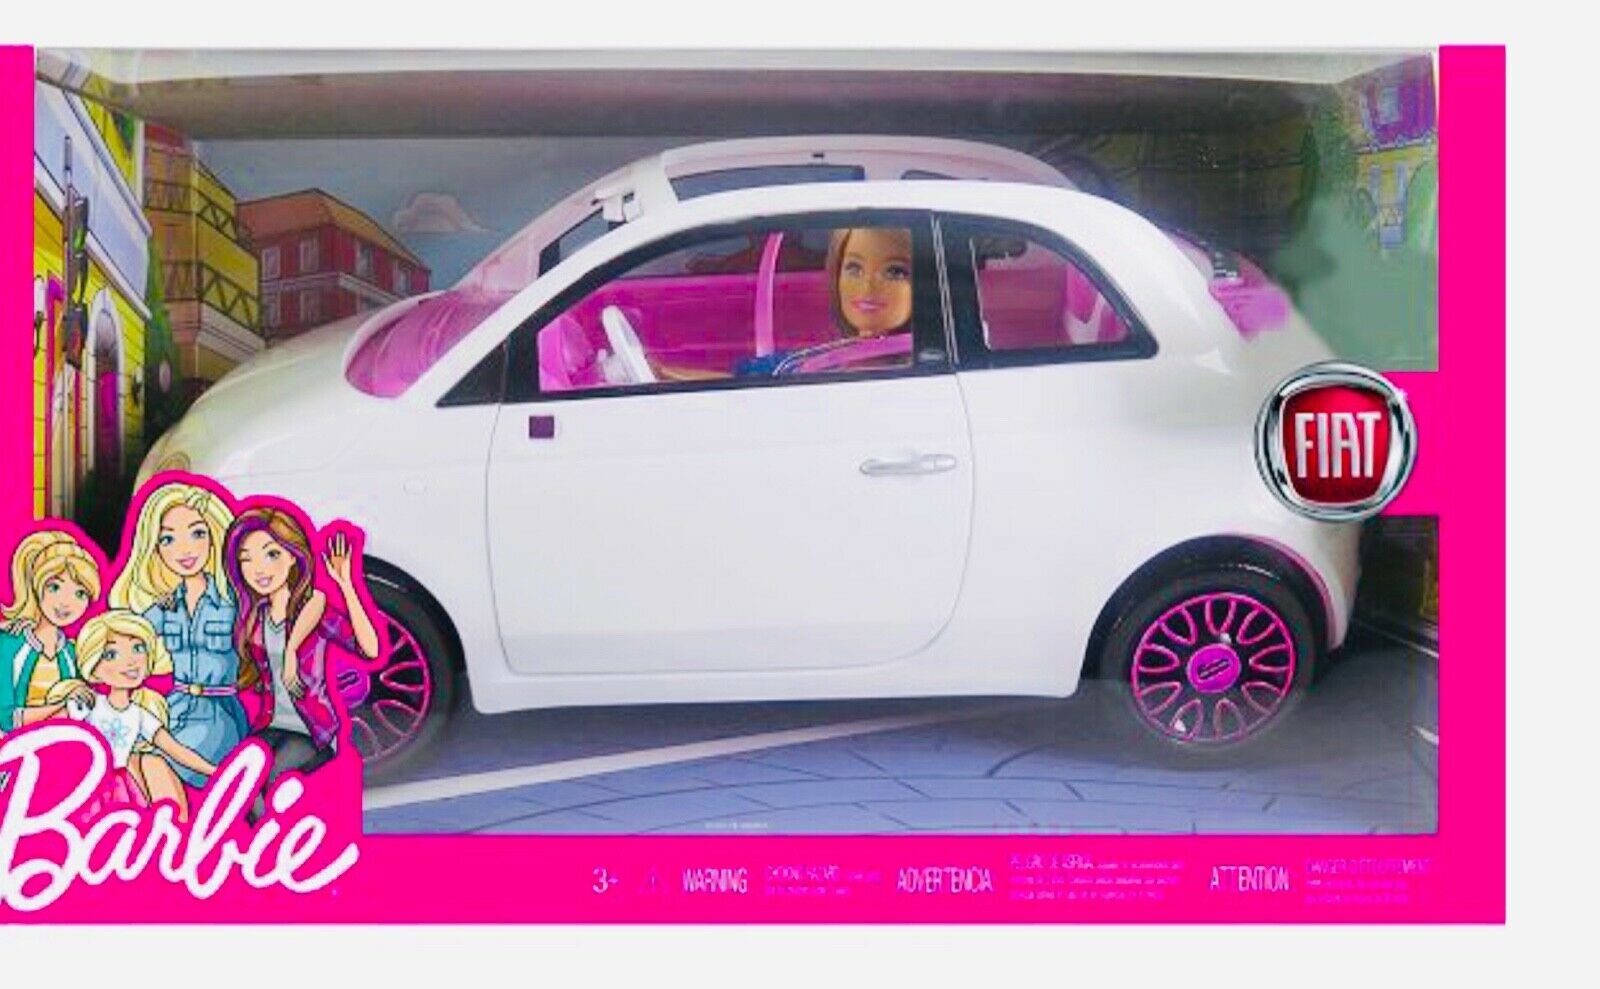 New Barbie Fiat Car With Barbie Doll Included Free Priority Nsured Shipping